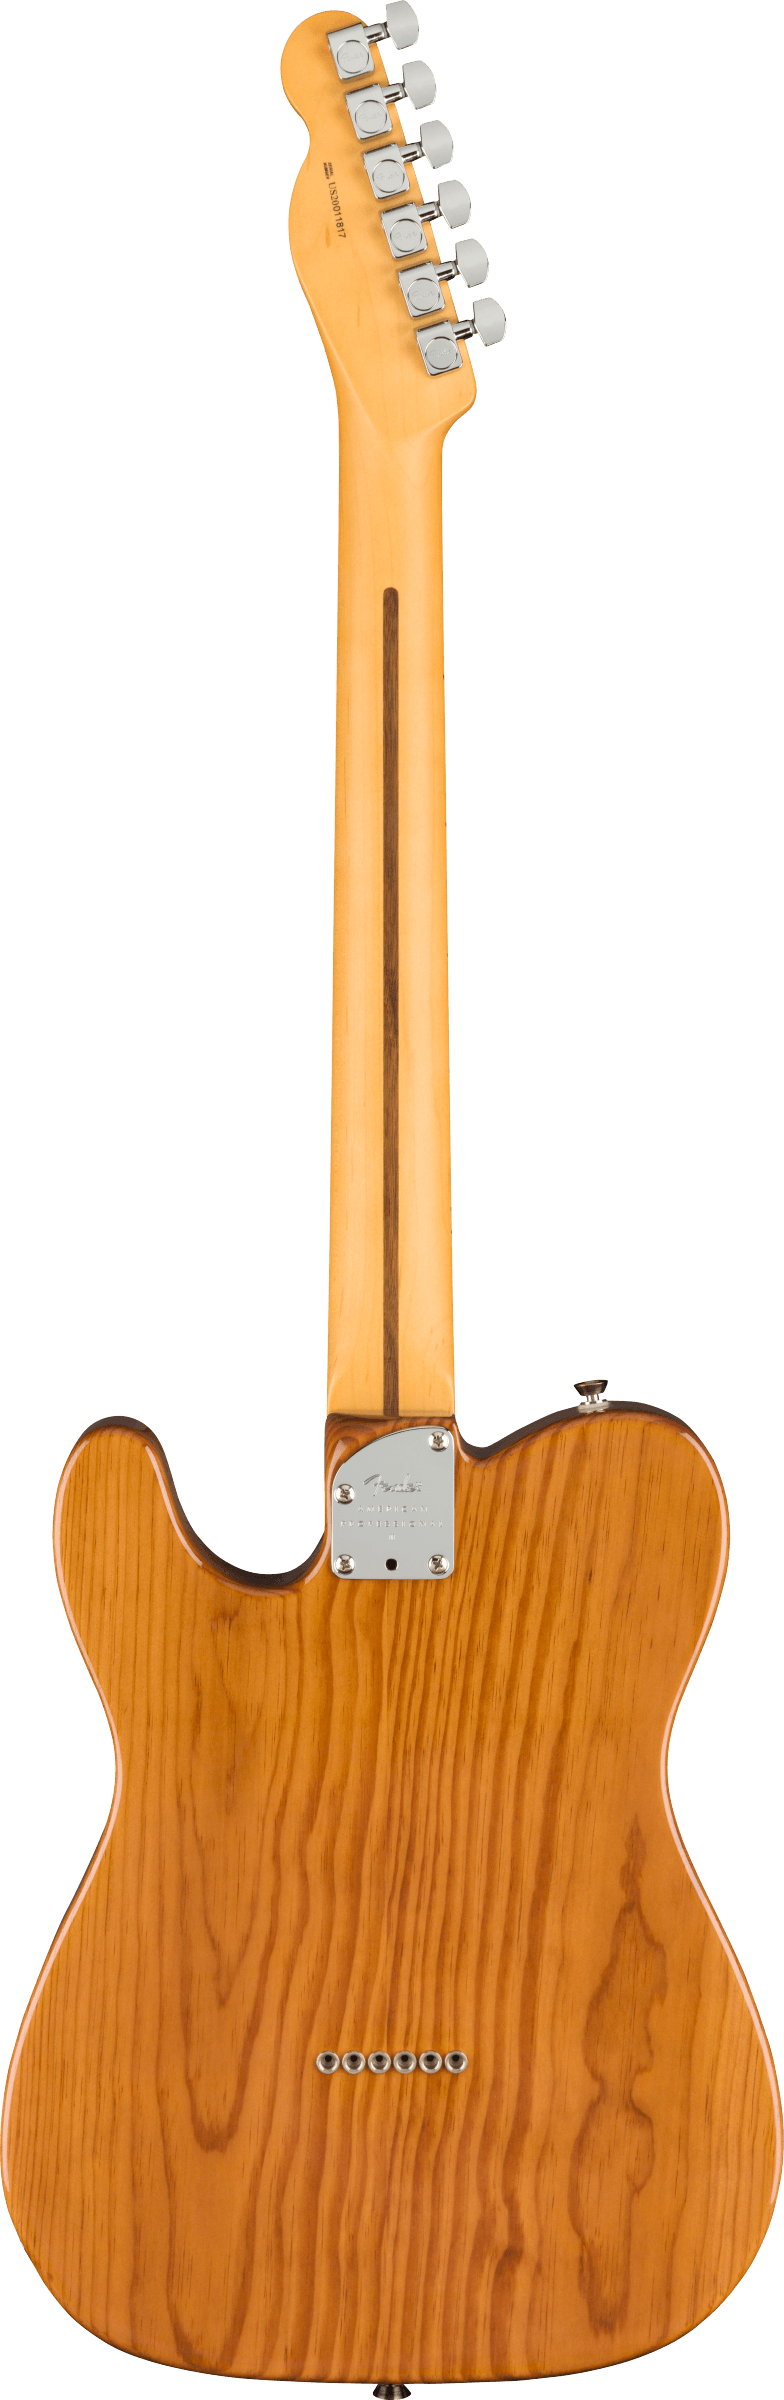 Fender American Professional II Telecaster - Maple Neck - Roasted Pine